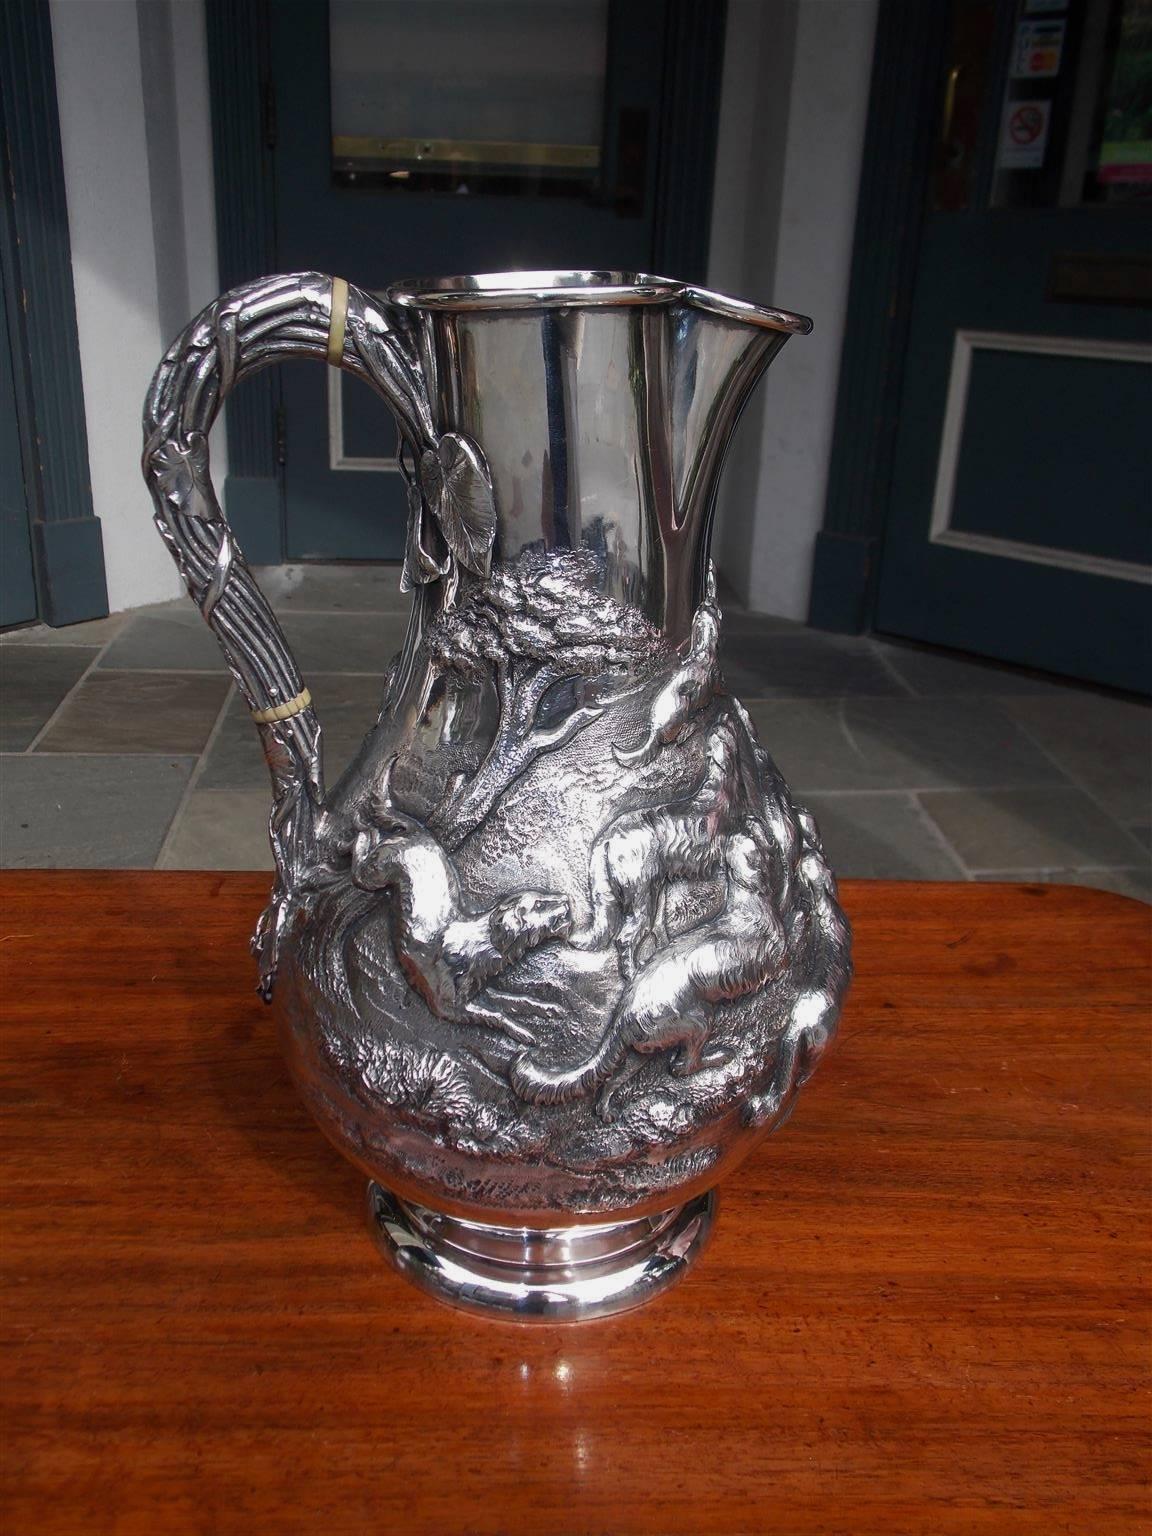 English sterling silver pitcher with embossed hunting scenes depicting a gentleman with his canine companions spearing an otter from a stream with a vine and ivory foliage motif handle all terminating on a circular ribbed base. Late 18th Century. 